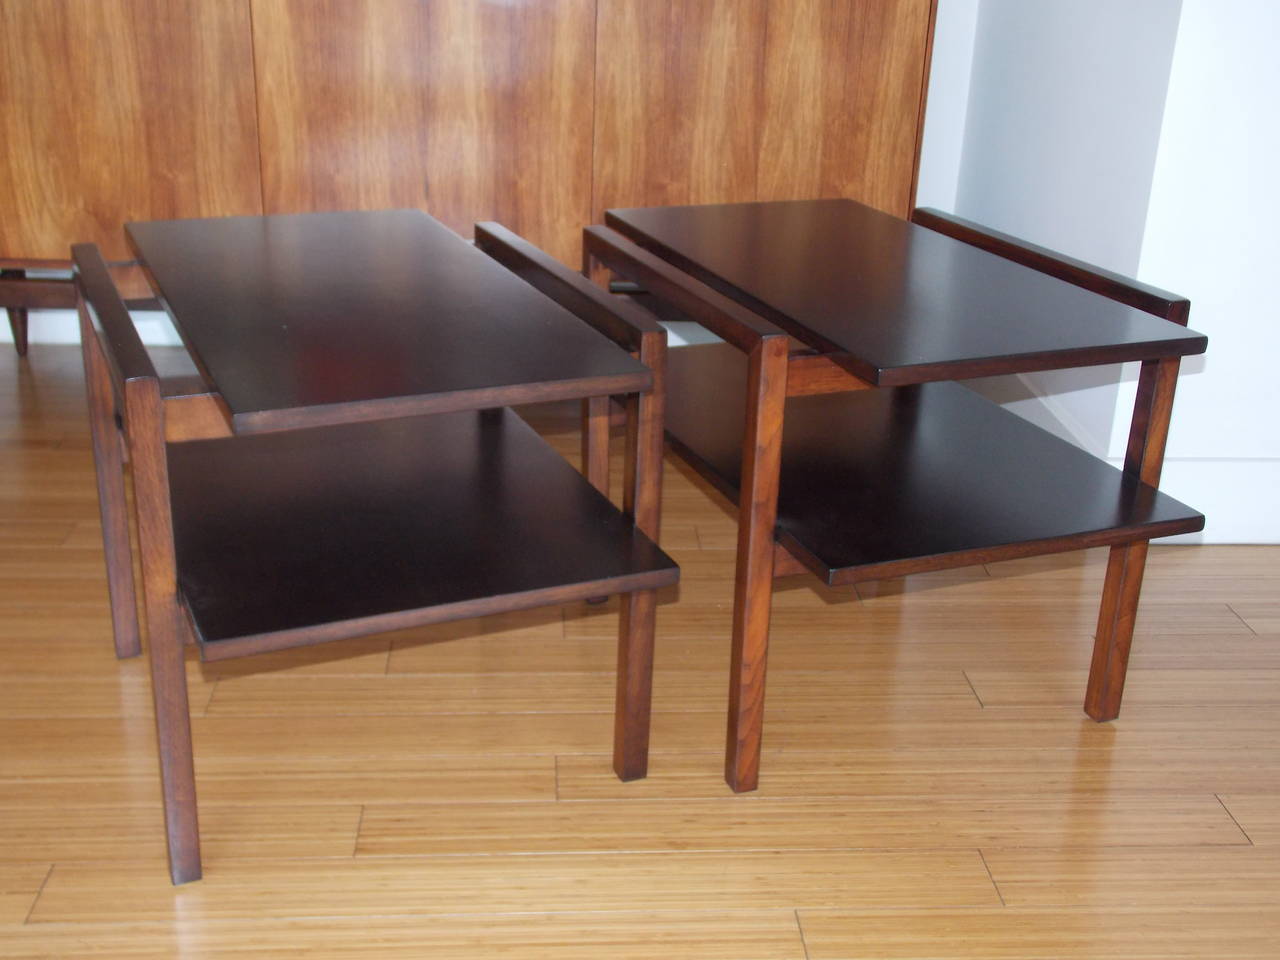 A handsome pair of tables.
Manufactured by Glenn of California. 
Made of plywood shelves (no press-board) with walnut veneer and solid walnut base frames, with original screws.
They have been refinished with a nice moca stain.
A timeless design